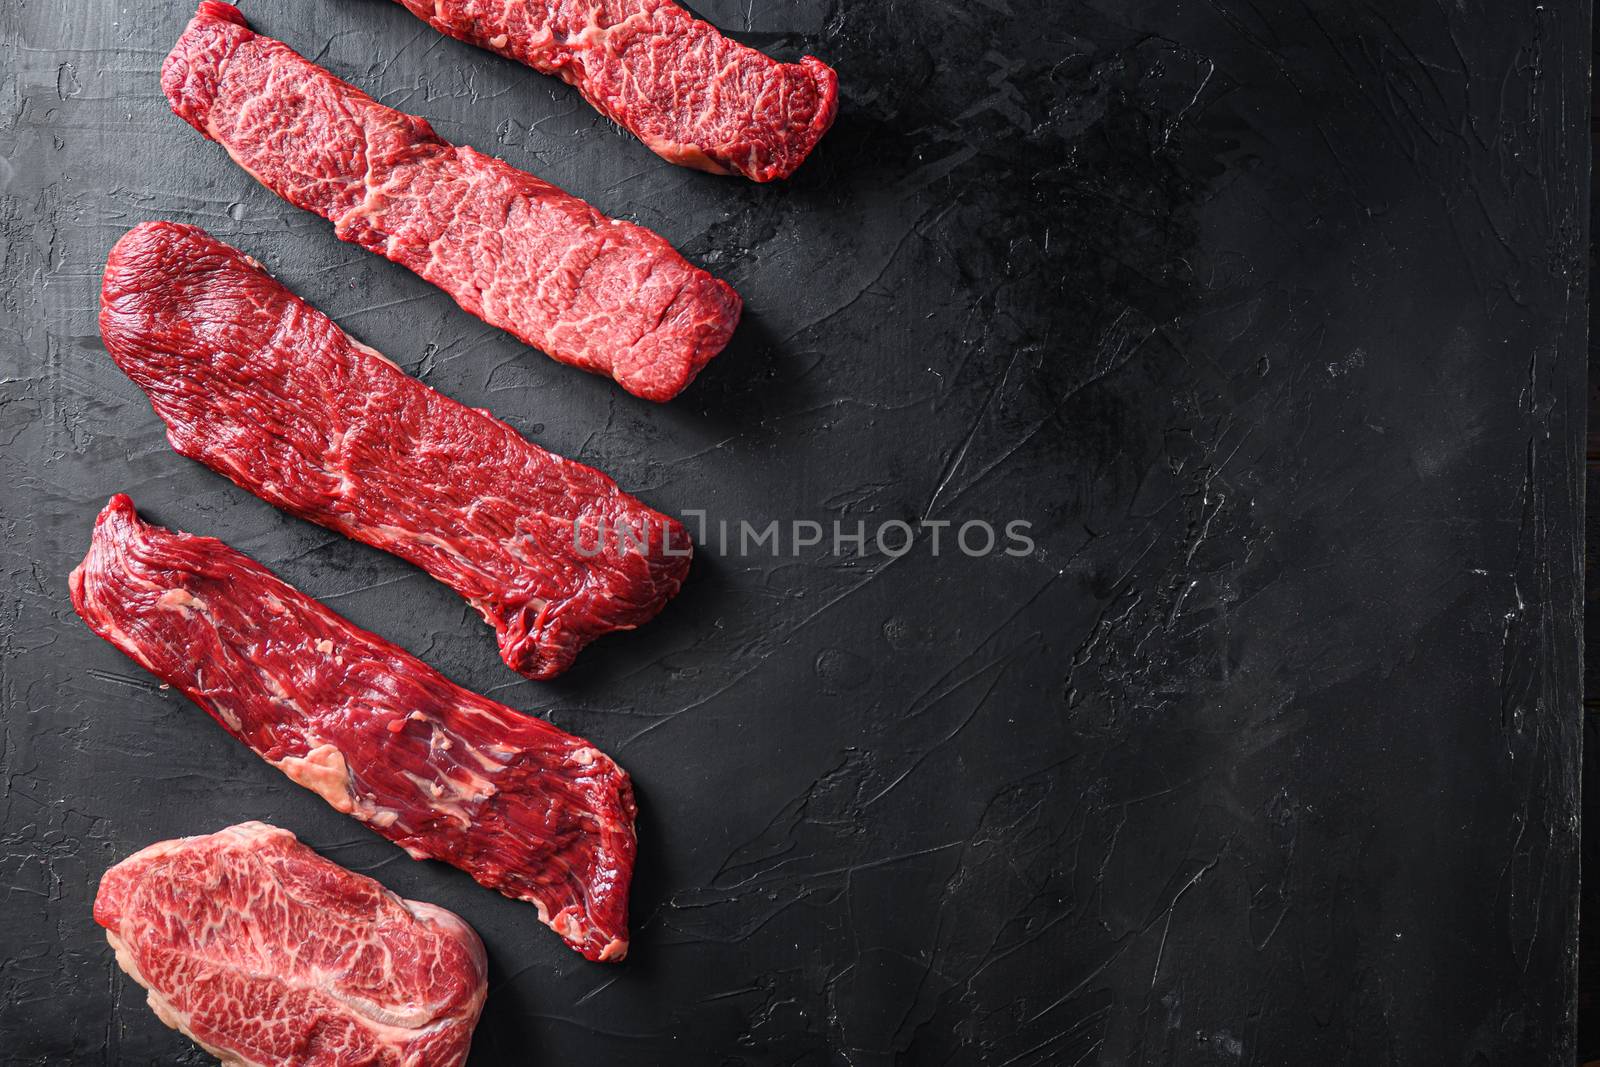 Raw, alternative beef steaks flap flank Steak, machete steak or skirt cut, Top blade or flat iron beef and tri tip, triangle roast with denver cut . Black stone background. Top view. Space for text by Ilianesolenyi